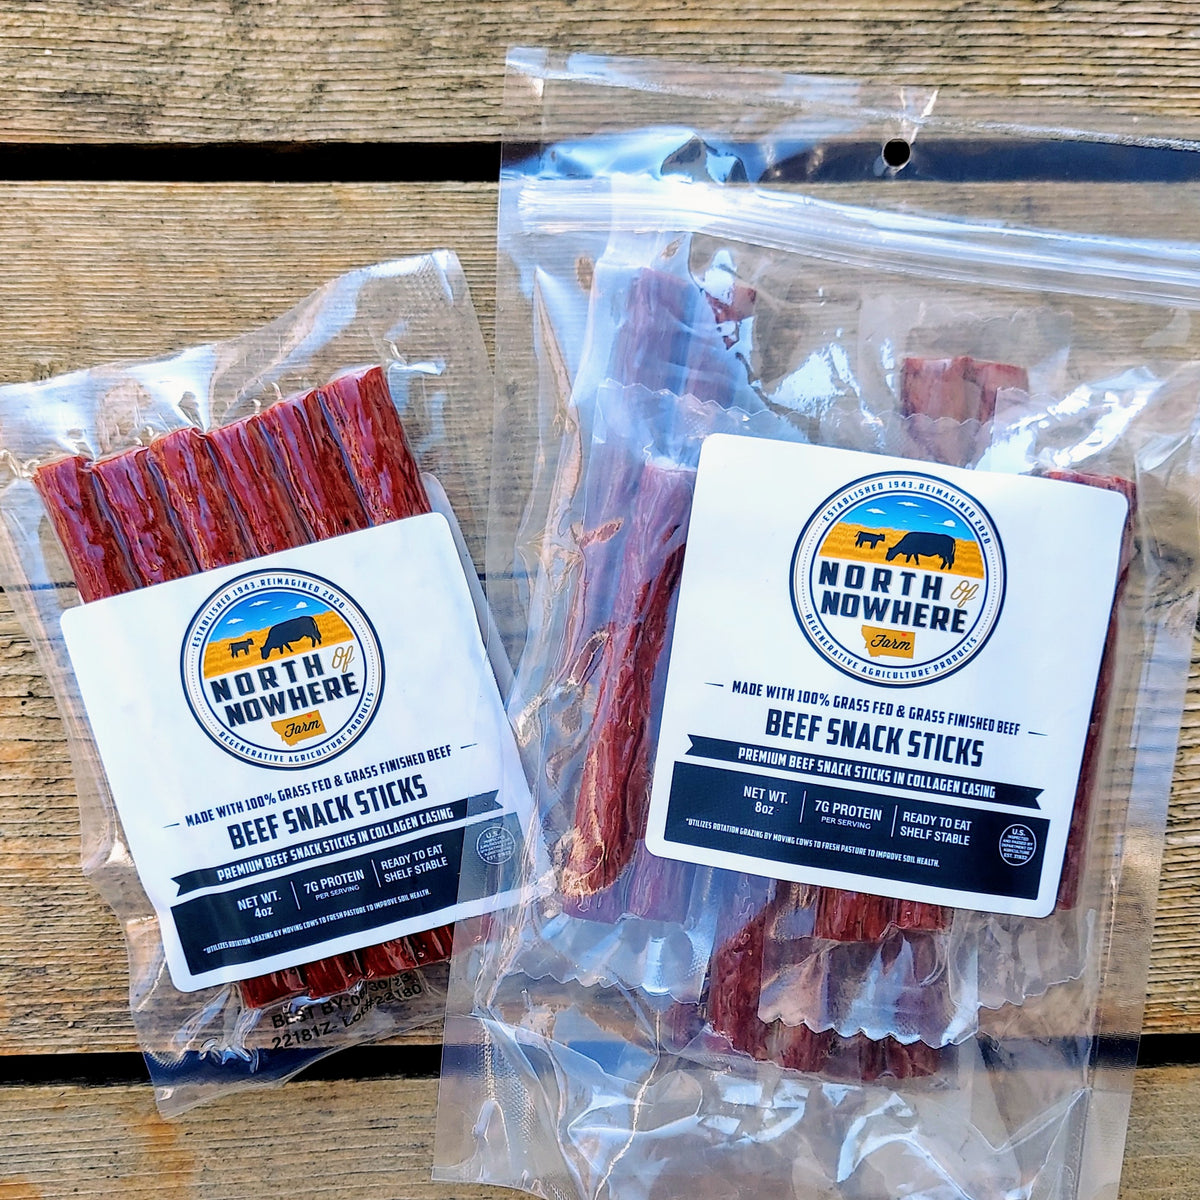 North of Nowhere Farms offers two different package types for their grassfed, grass-finished beef sticks: a 4-ounce vacuum-sealed 6-pack and an 8-ounce resealale pouch of 8 individually vacuum-sealed beef sticks. Packages shown on barnwood background.